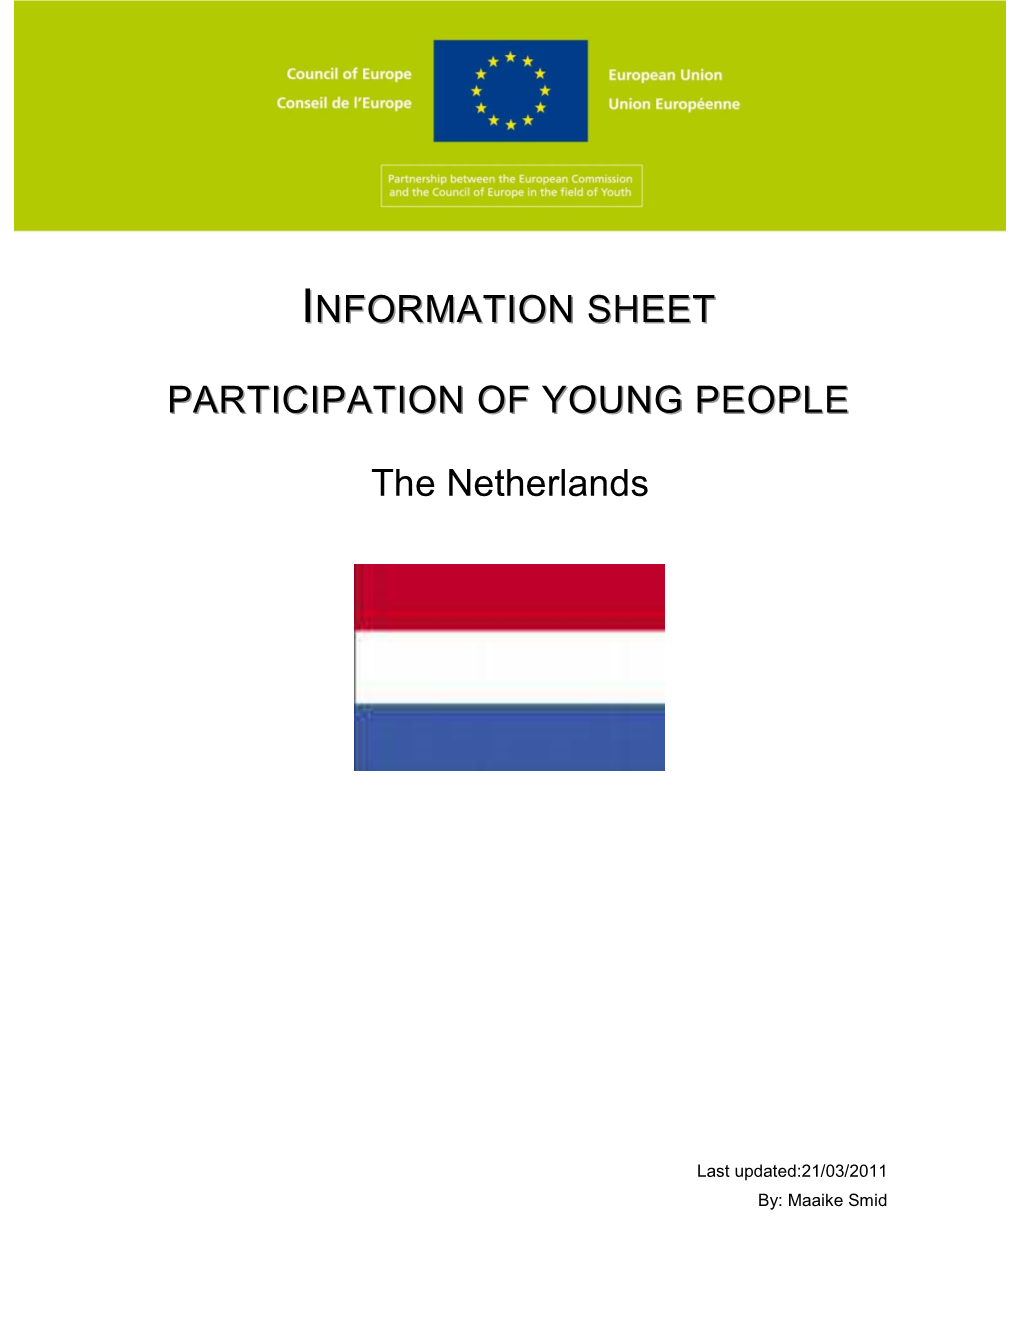 Participation of Young People’ the Netherlands - 0 - TABLE of CONTENTS